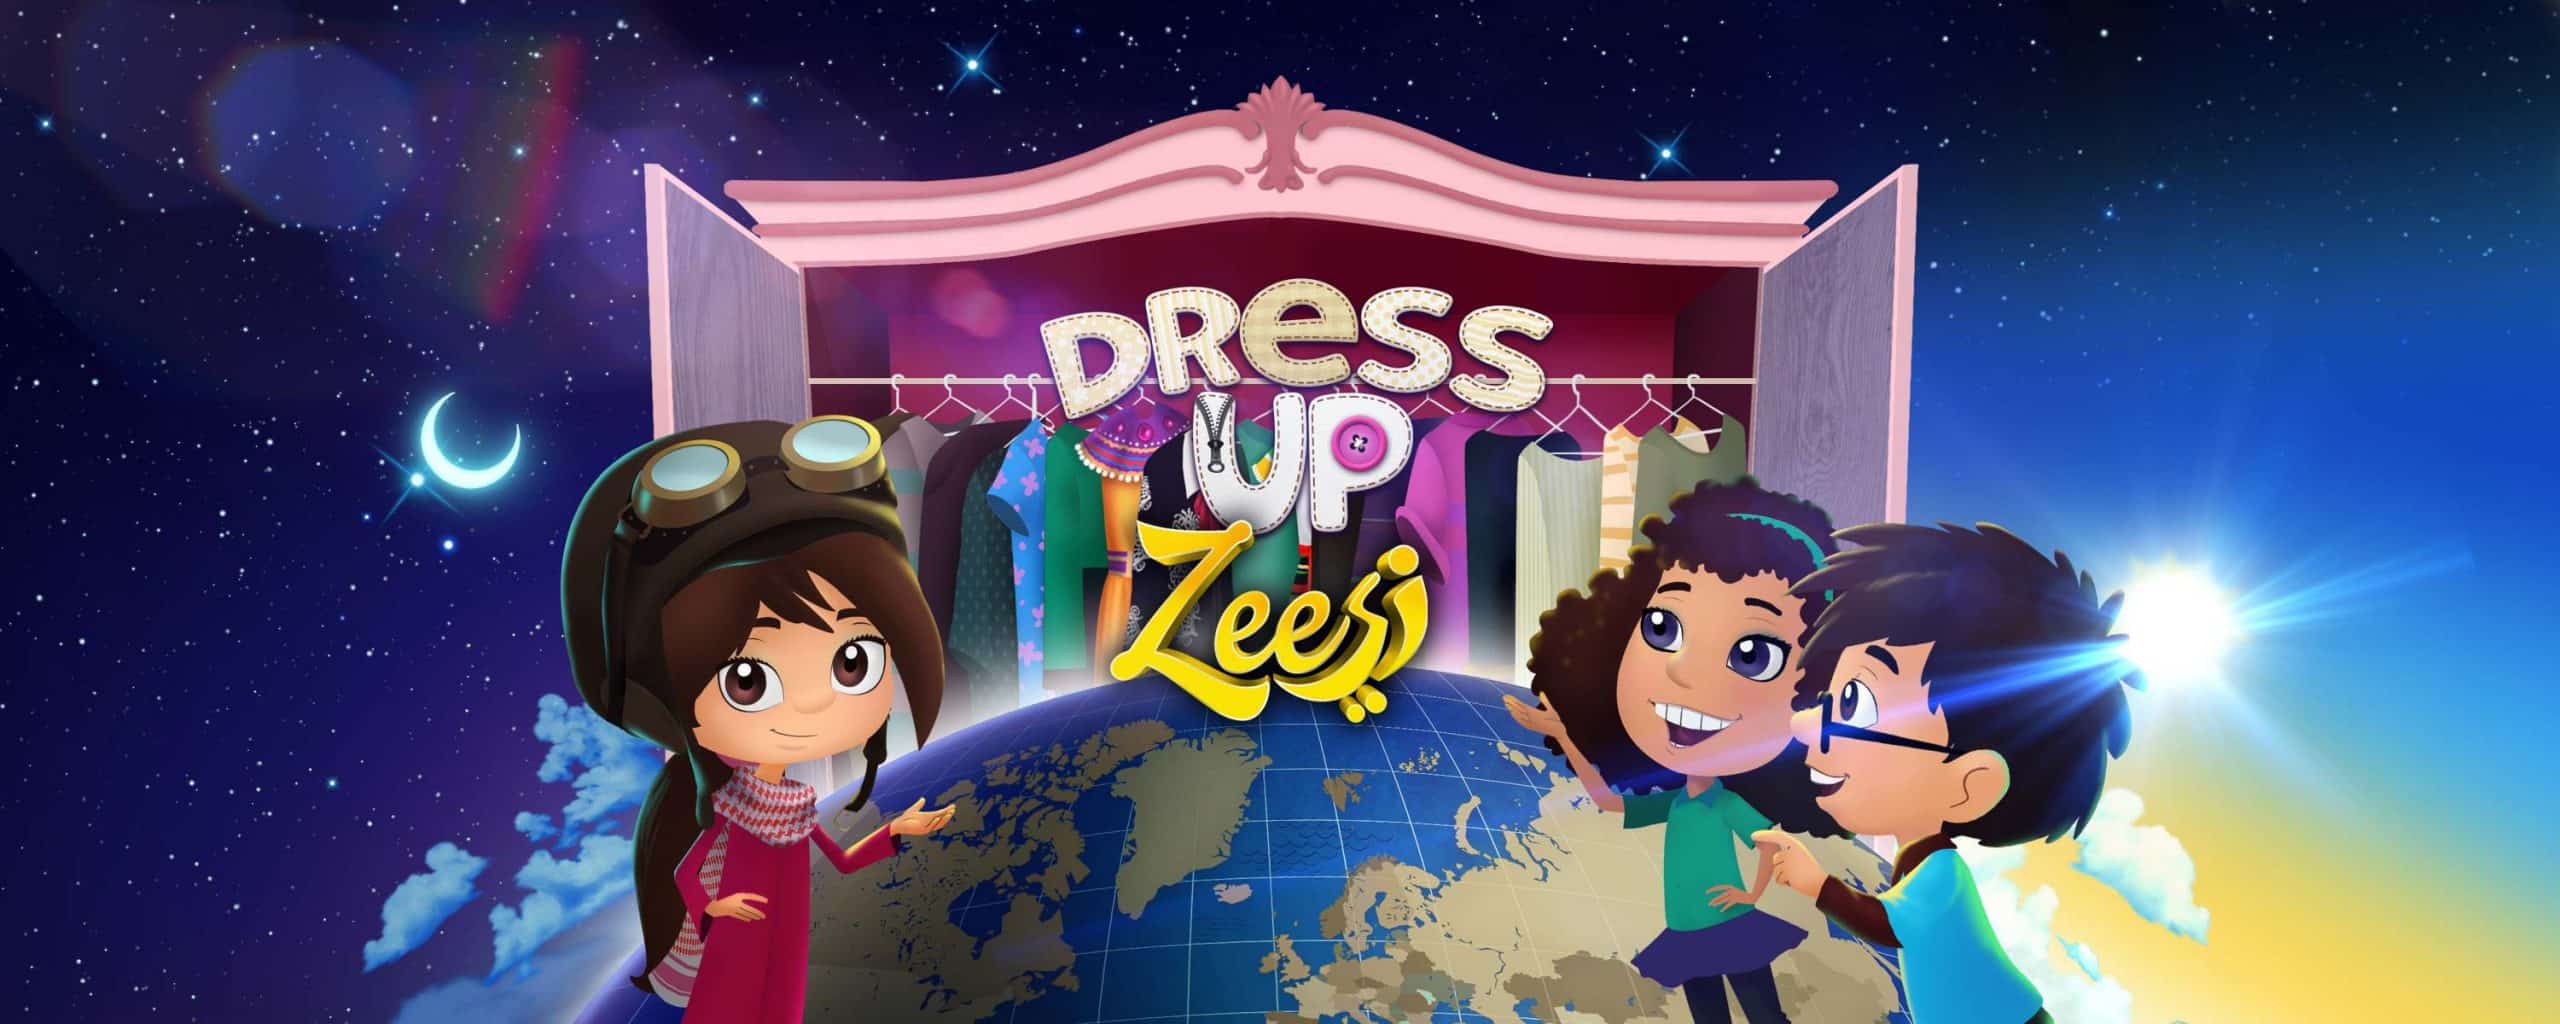 featured dress up zee scaled